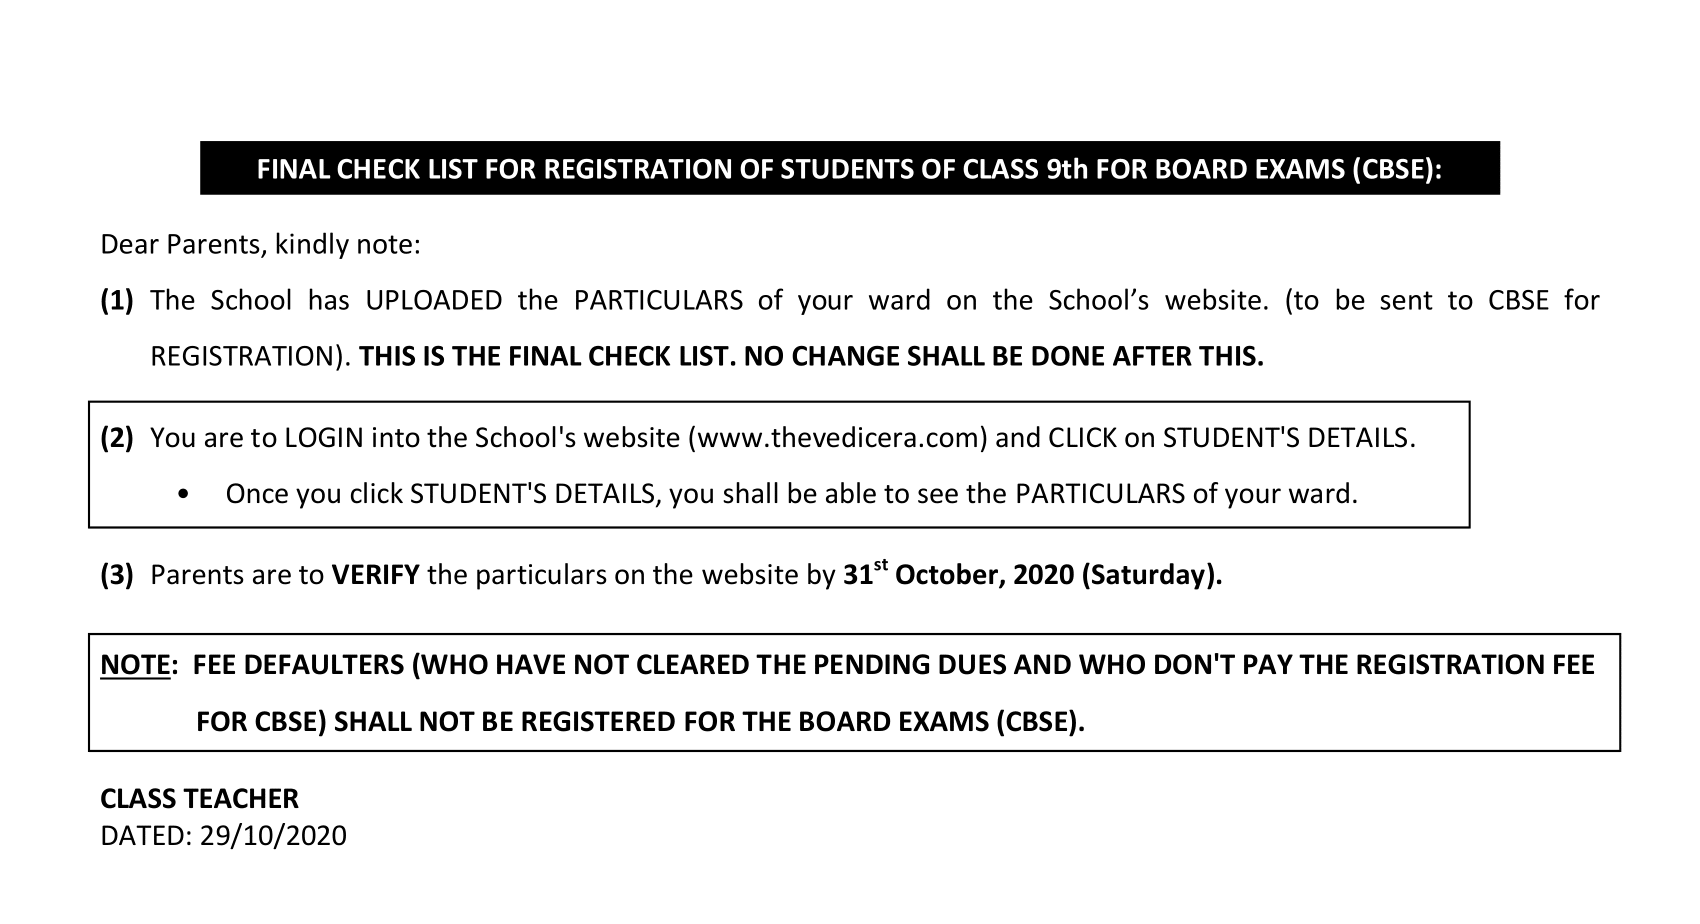 REGISTRATION OF STUDENTS OF CLASS 9th IN CBSE